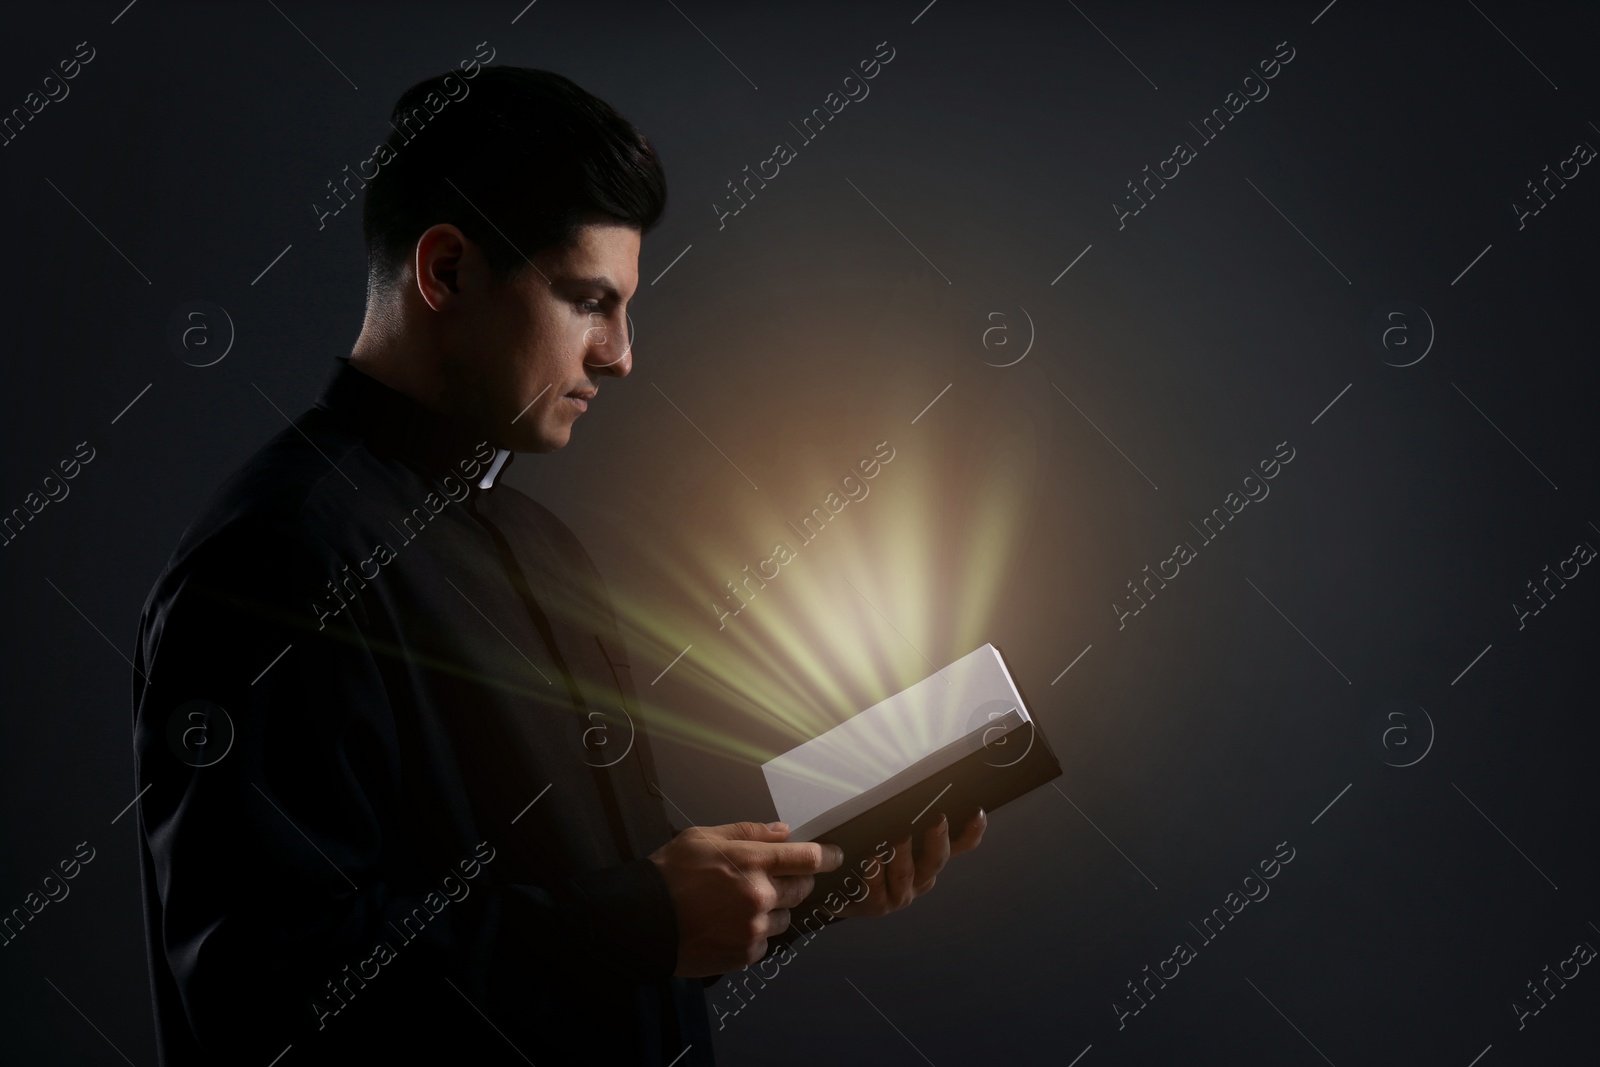 Image of Priest holding Bible with holy light on black background